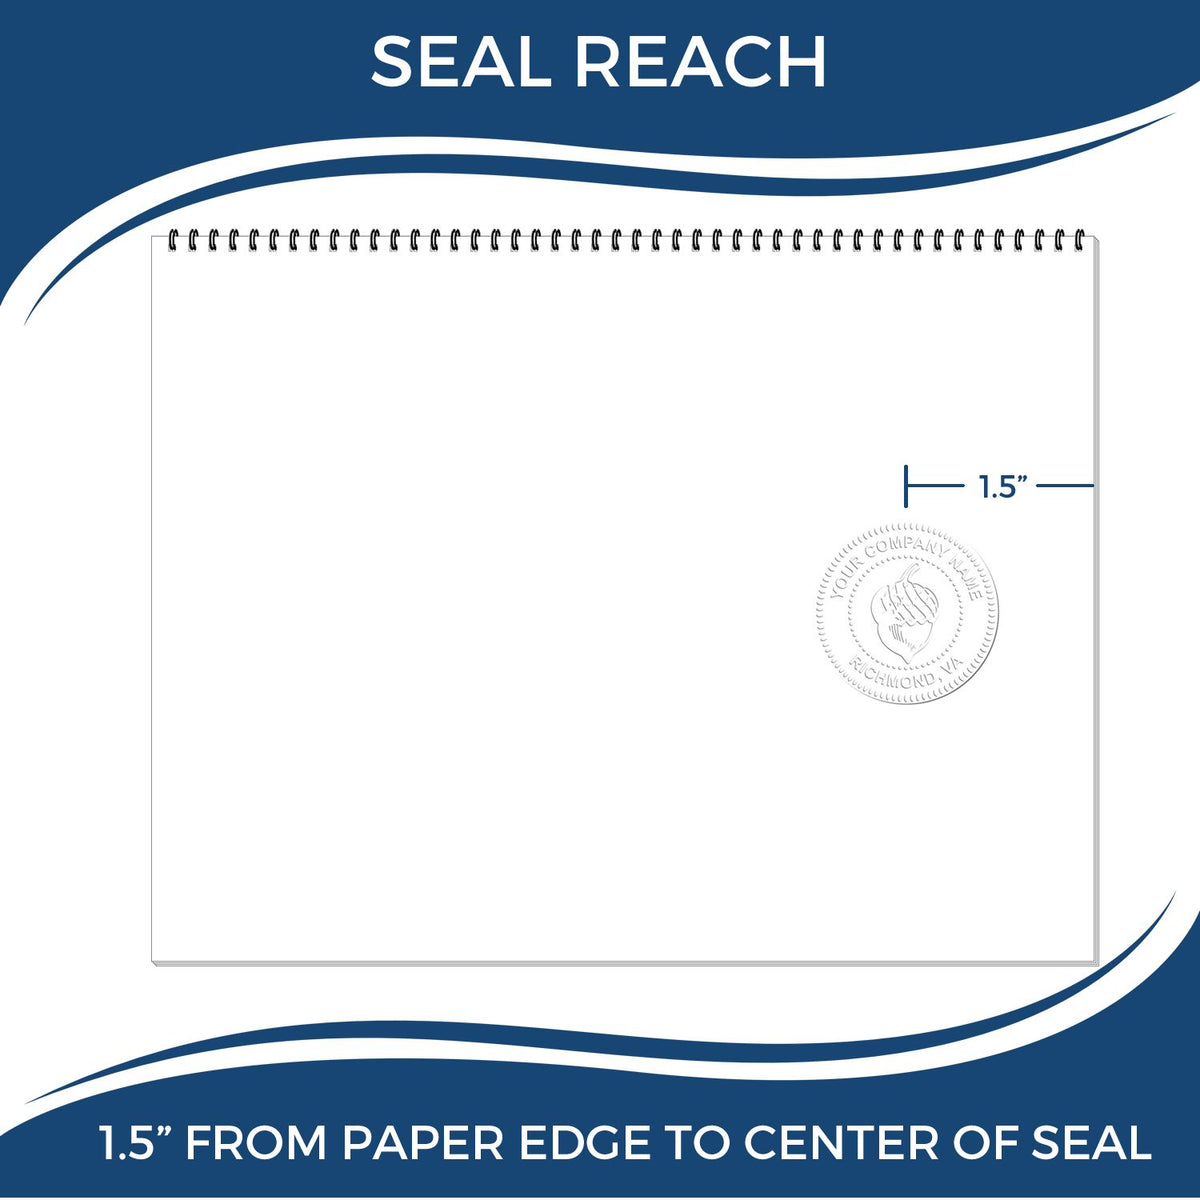 An infographic showing the seal reach which is represented by a ruler and a miniature seal image of the Kentucky Geologist Desk Seal